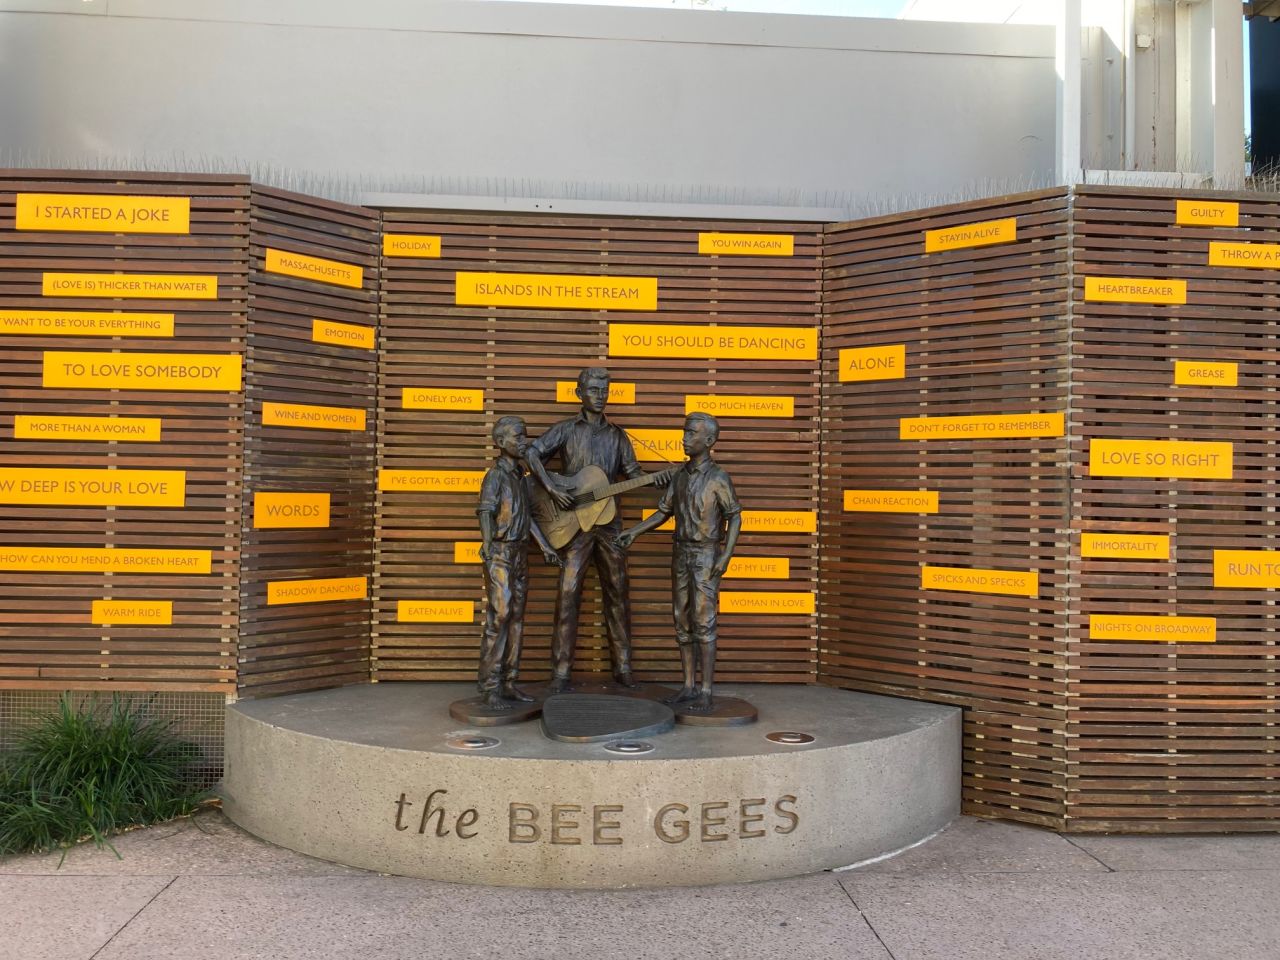 Members and guests visited the Bee Gees tribute at Redcliffe during a day outing in Sept 2021